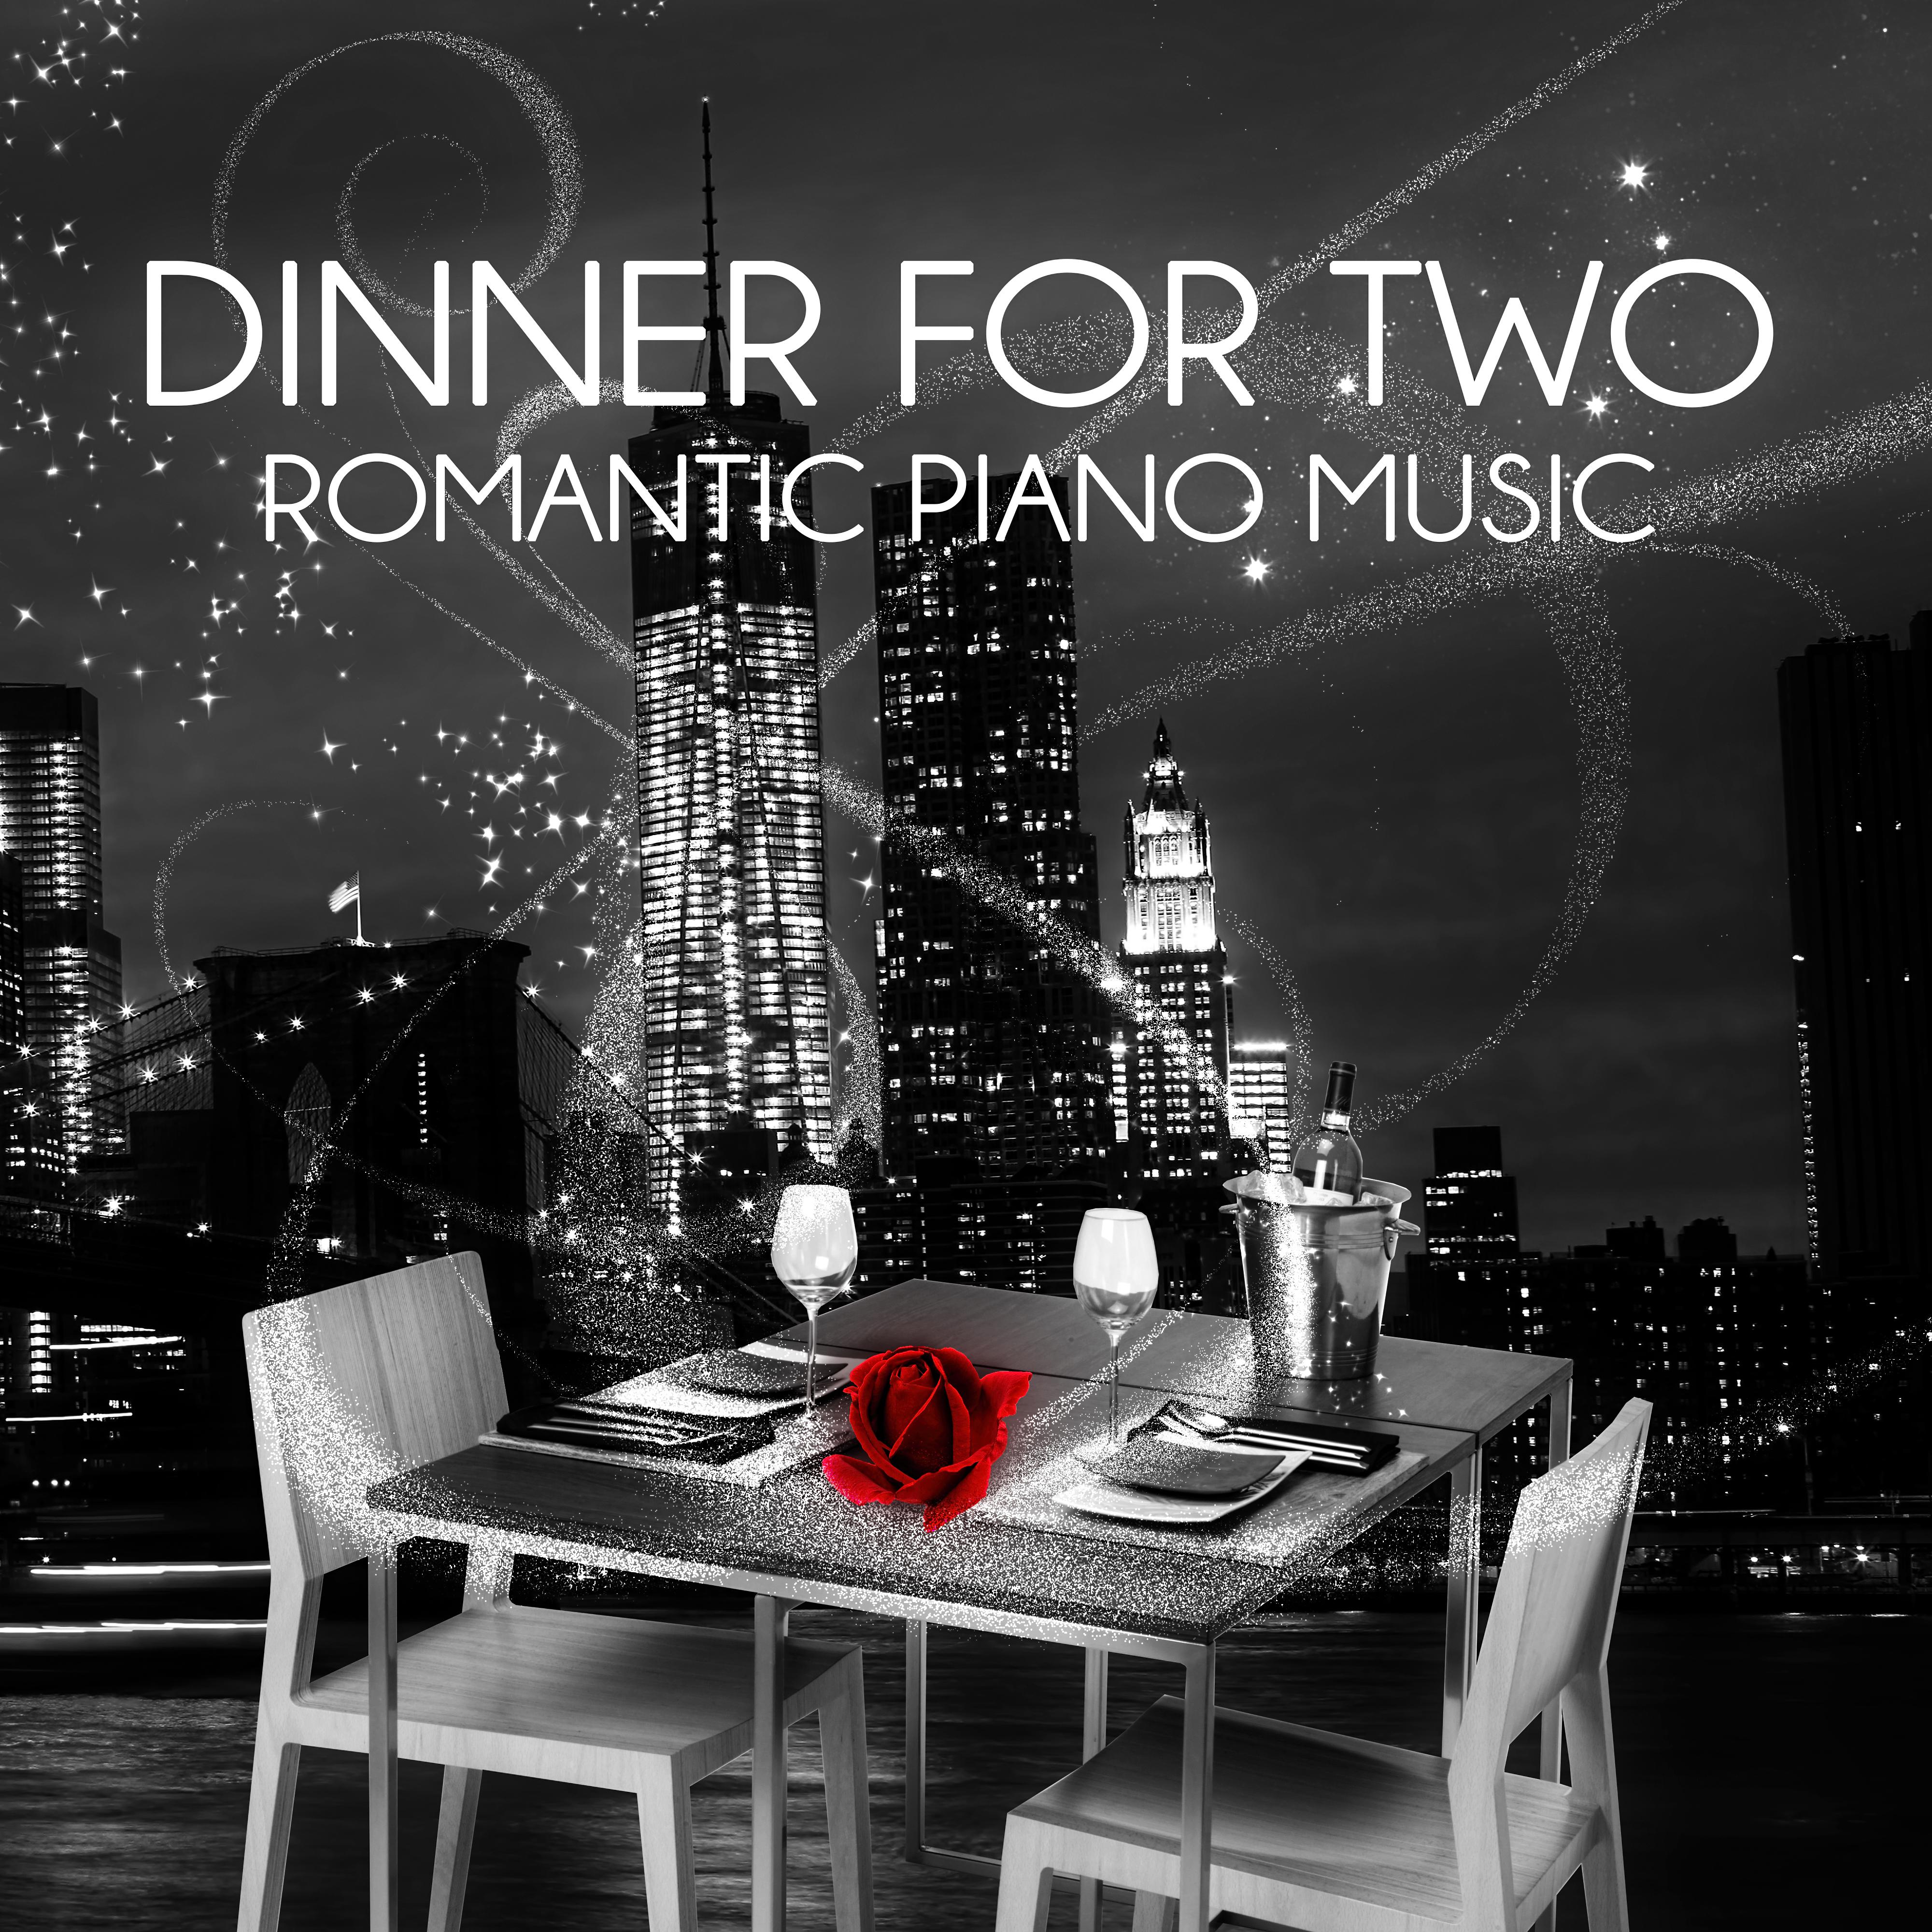 Dinner for Two - Romantic Piano Music, Background Music for Wedding Anniversary, Love Songs for Honeymoon Romantic Dinner, Intimate Moments